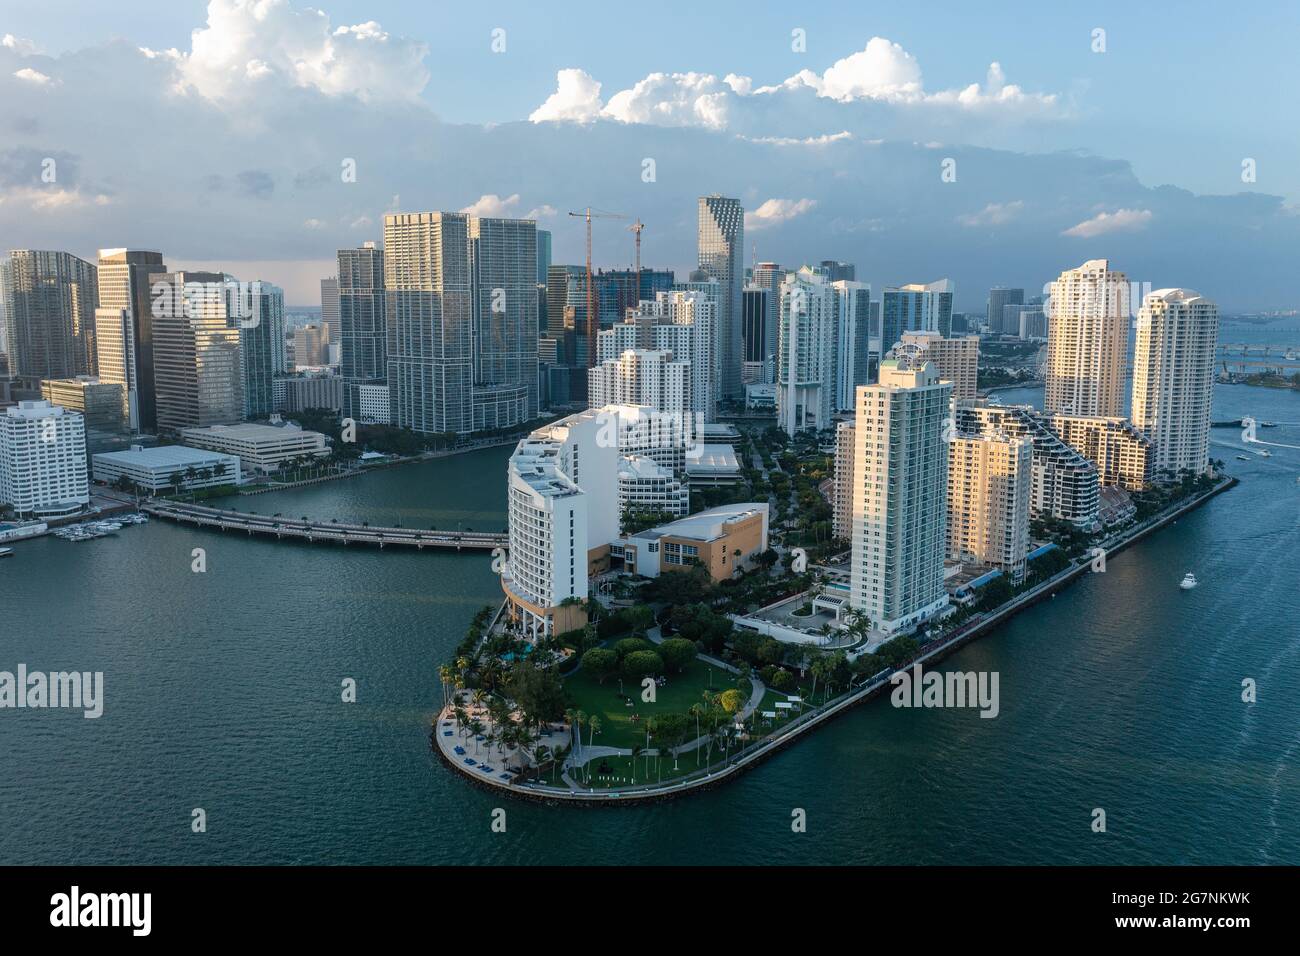 Drone Helicopter View of Miamia Beach above Highrises and Condos Stock Photo